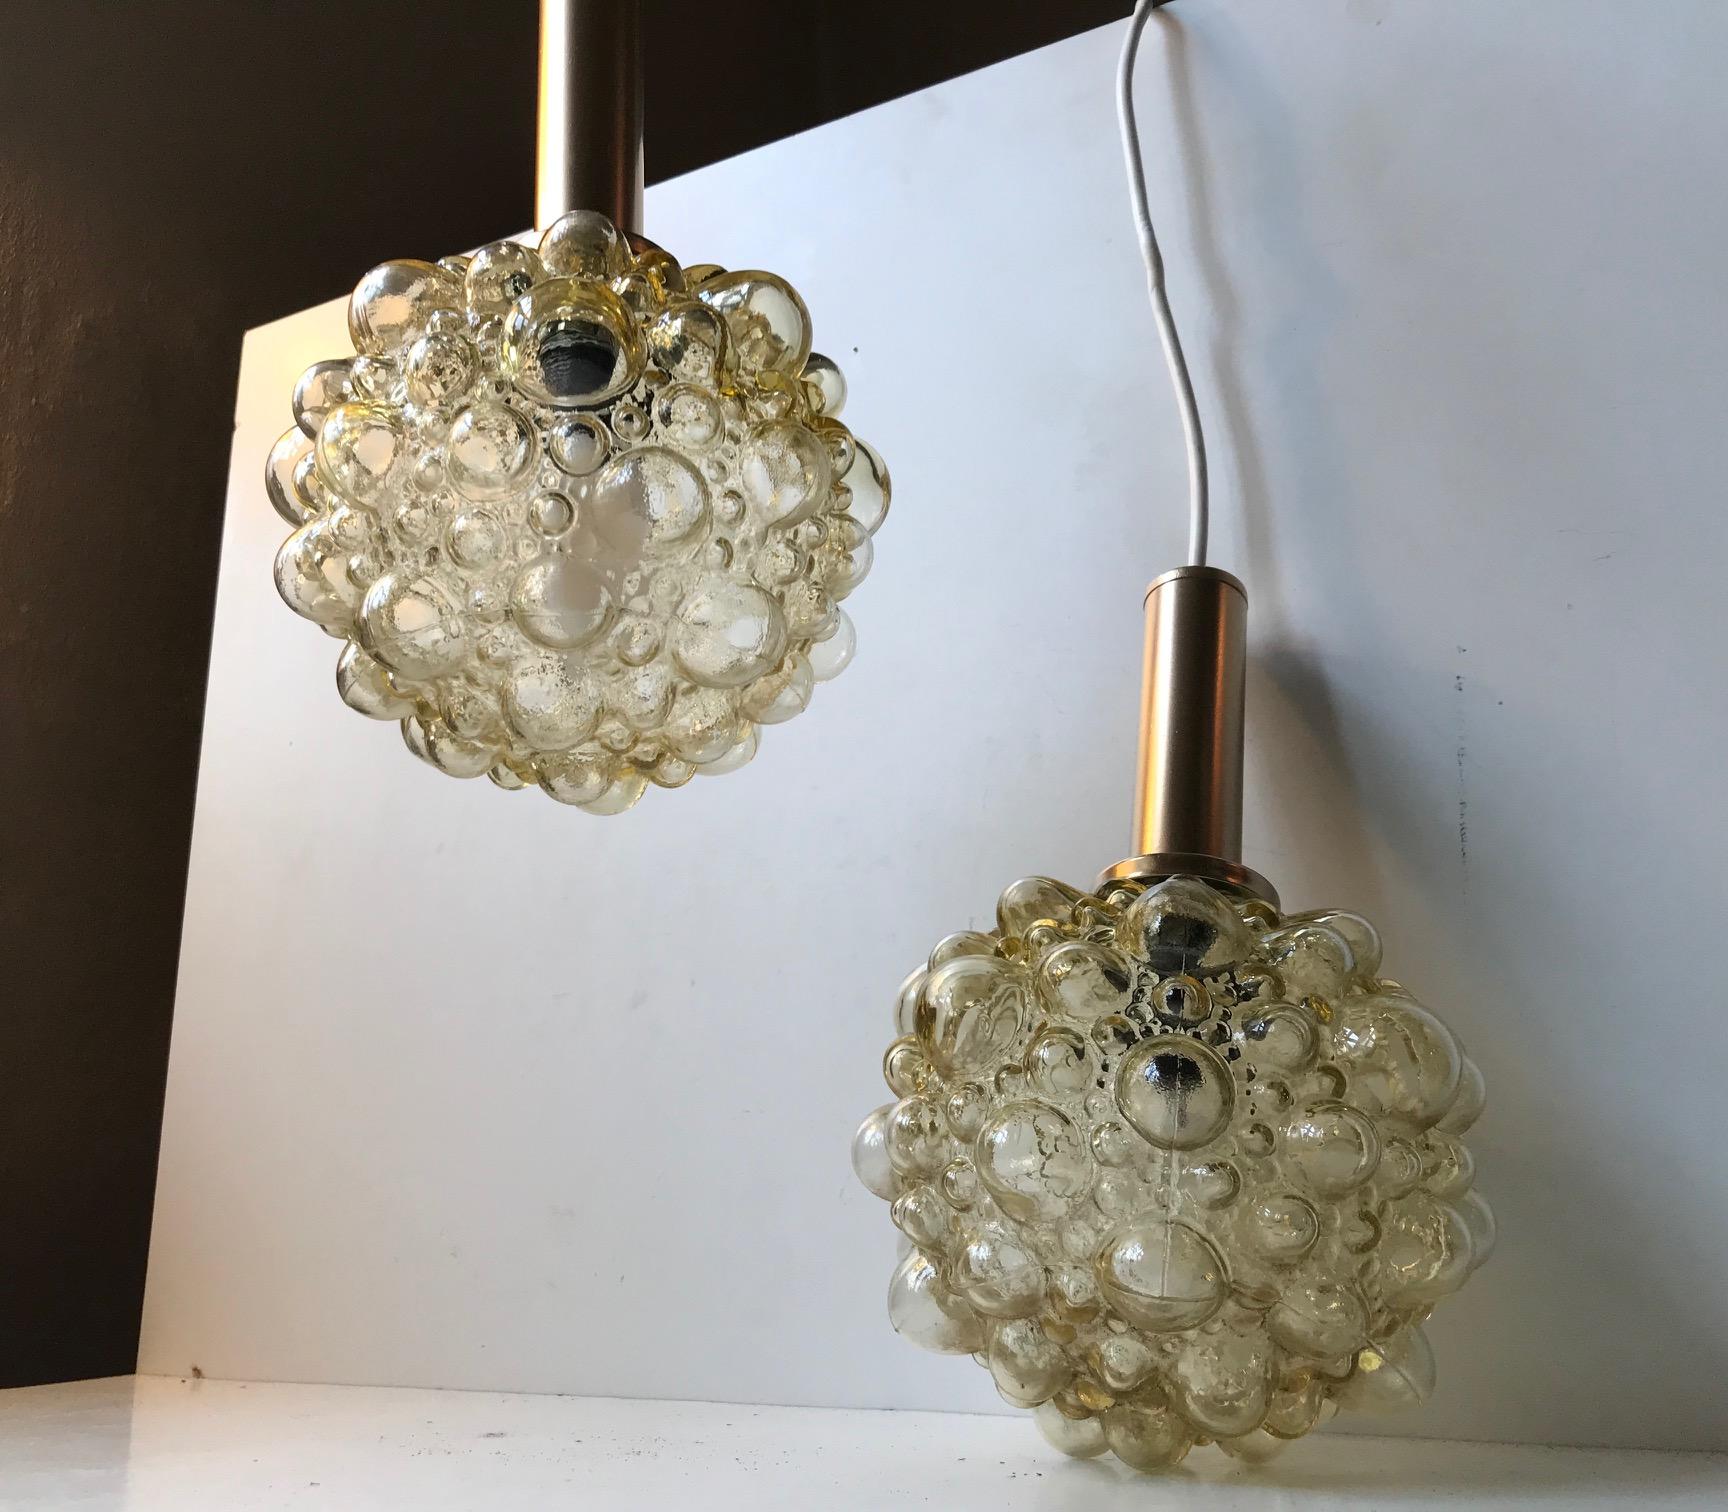 These round smoke tone amber bubble glass pendant lamps was designed by Helena Tynell for Limburg, and manufactured in Glashütte, Germany during the 1960s. The golden top's may have been re-lacquered at some point.